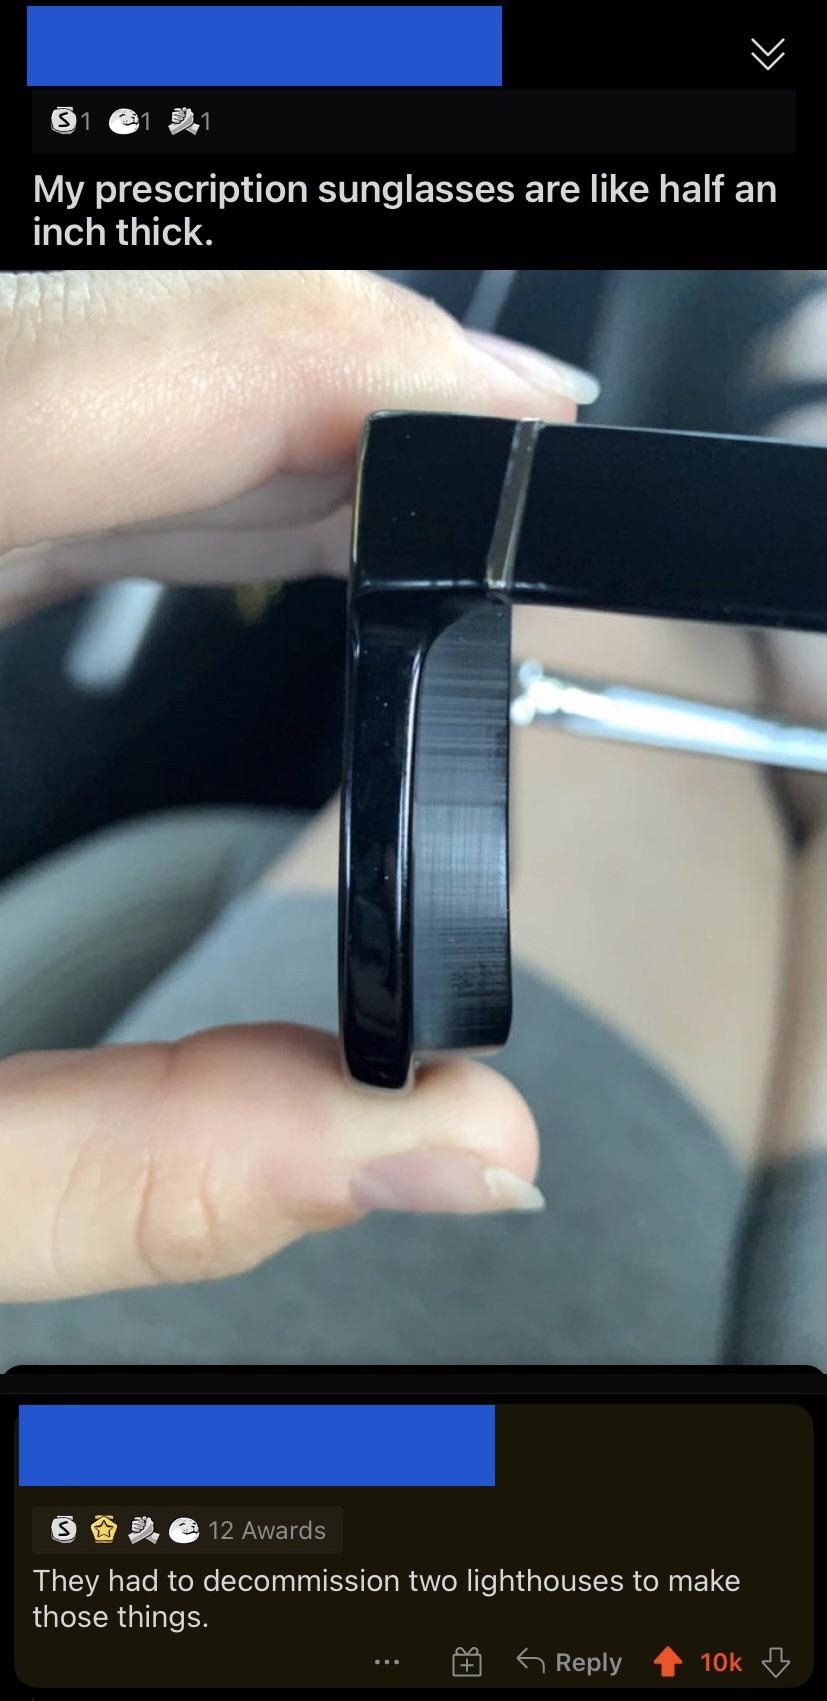 Person posts photo of their prescription sunglasses that &quot;are like half an inch thick,&quot; and someone comments, &quot;They had to decommission two lighthouses to make those things&quot;